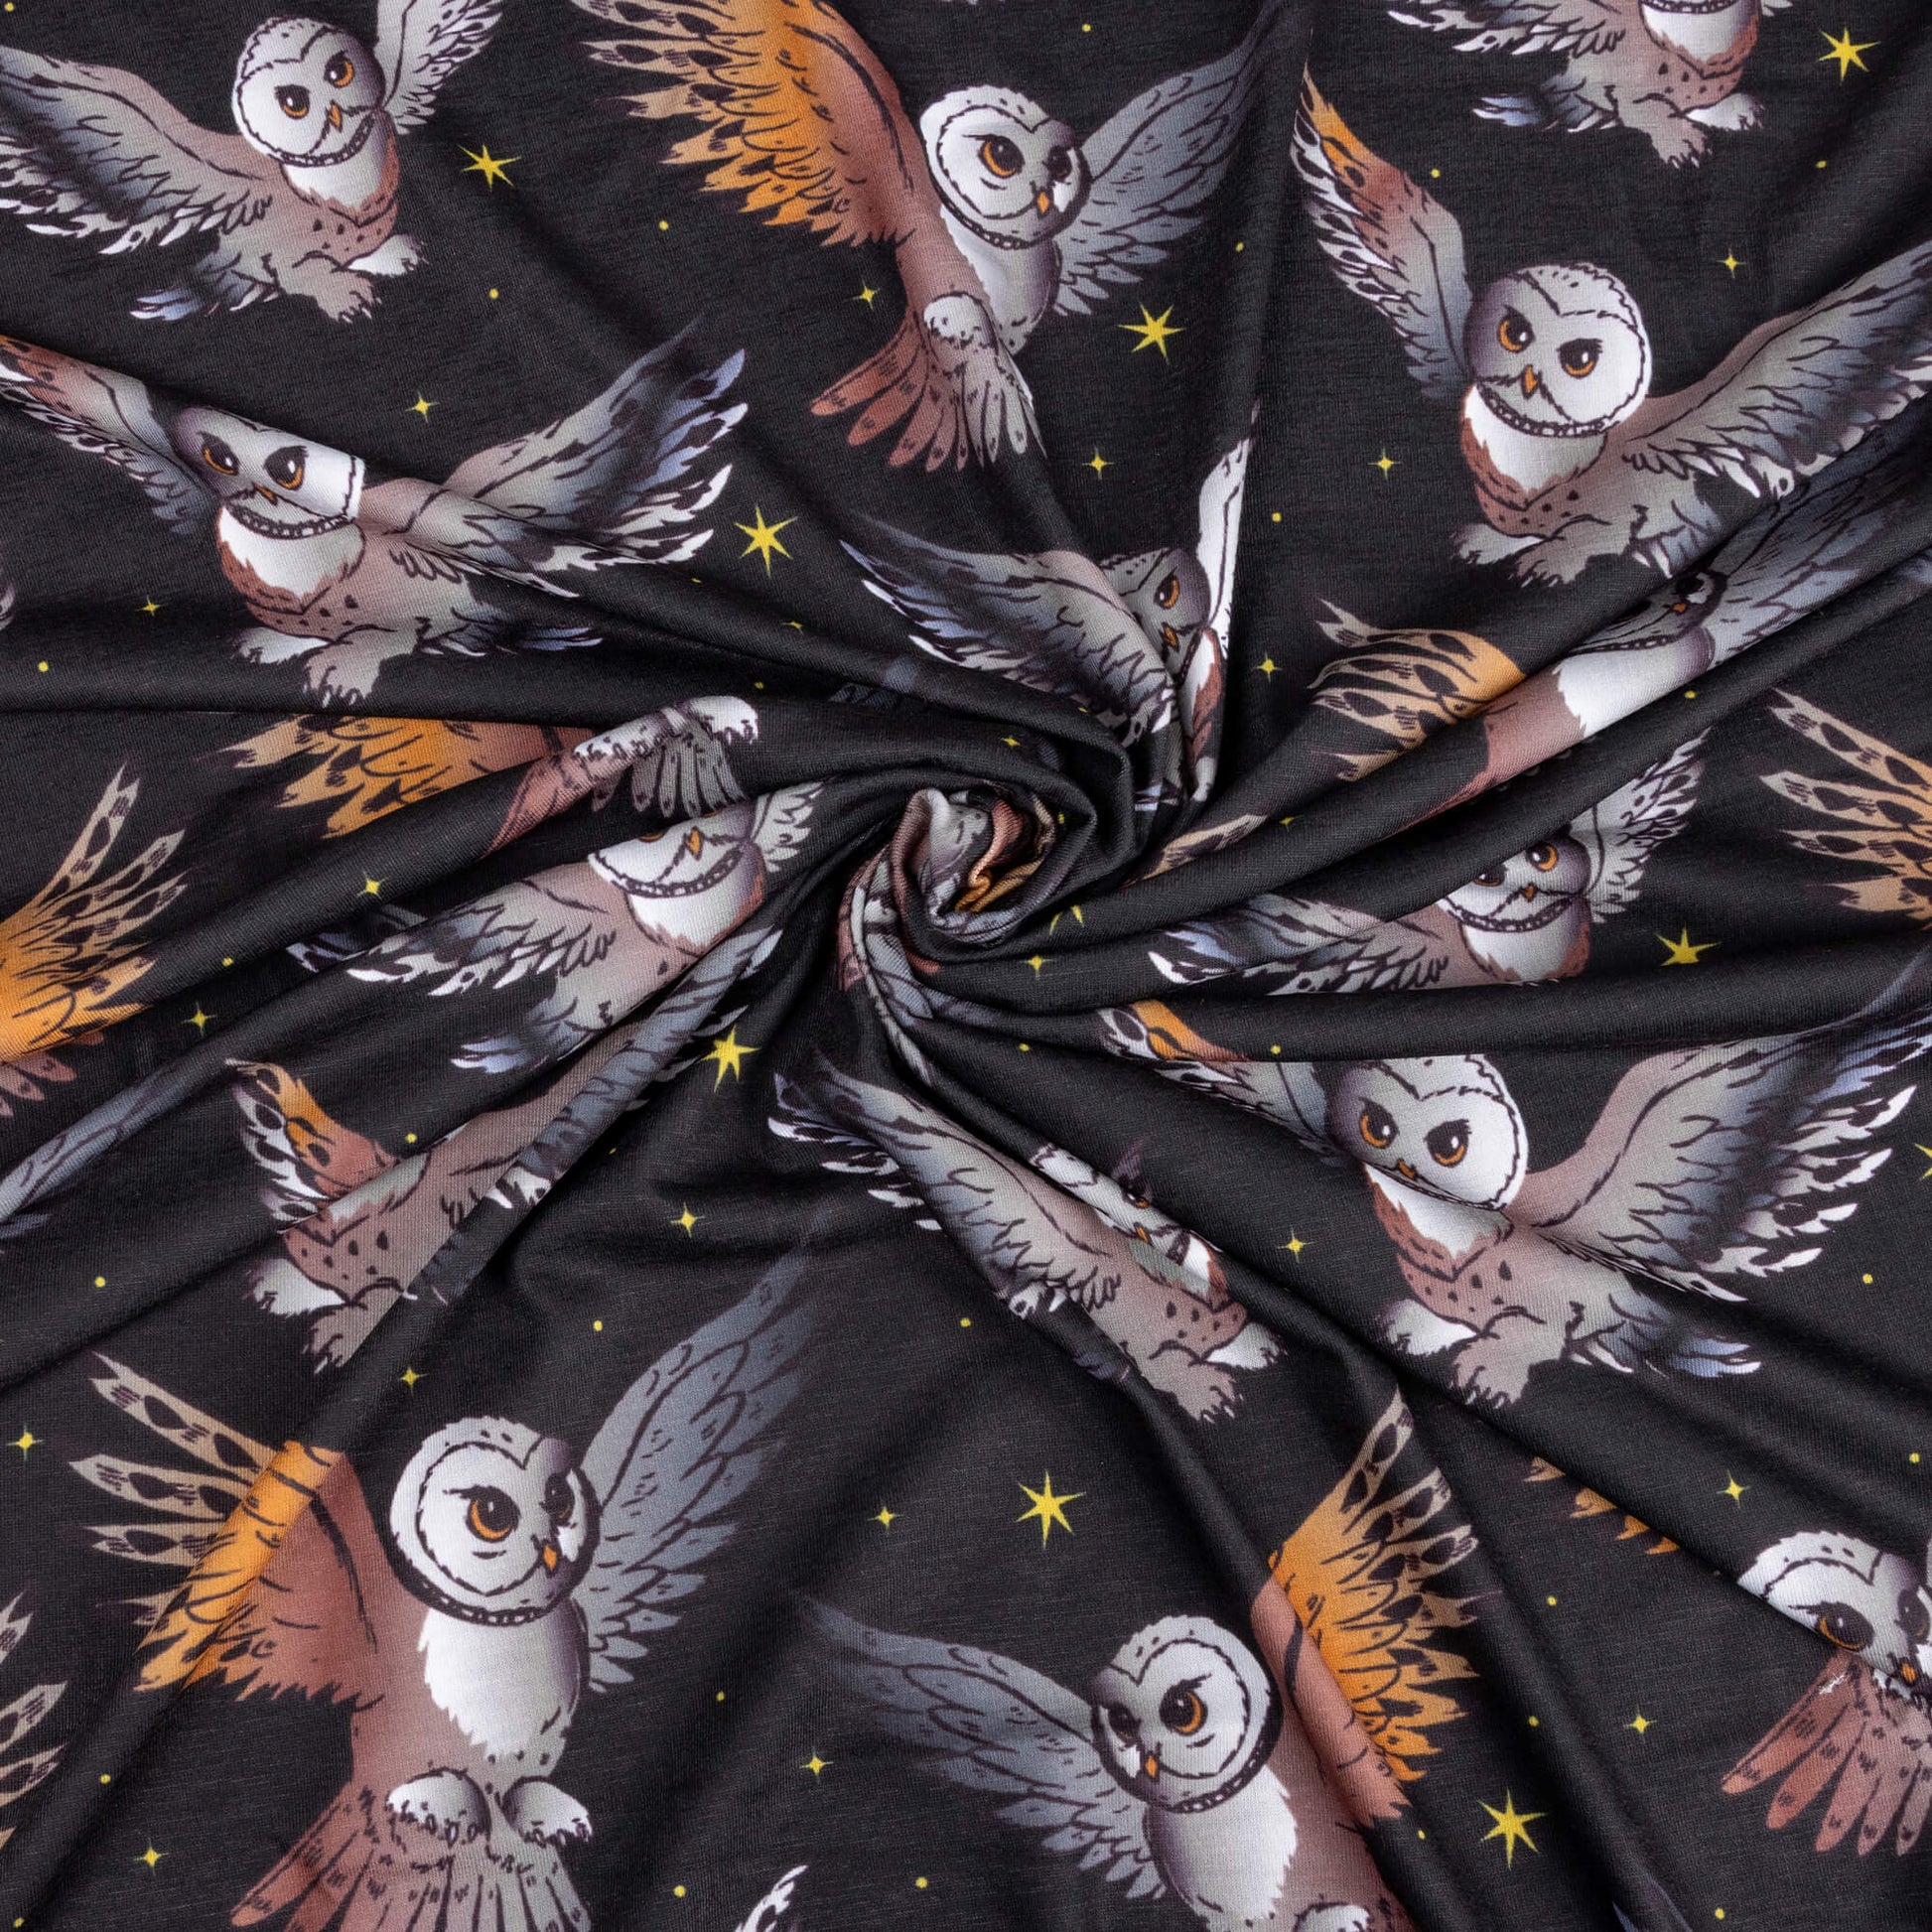 A swirl of the What a hoot stretch jersey fabric featuring barn owls in flight with black background and yellow twinkly stars